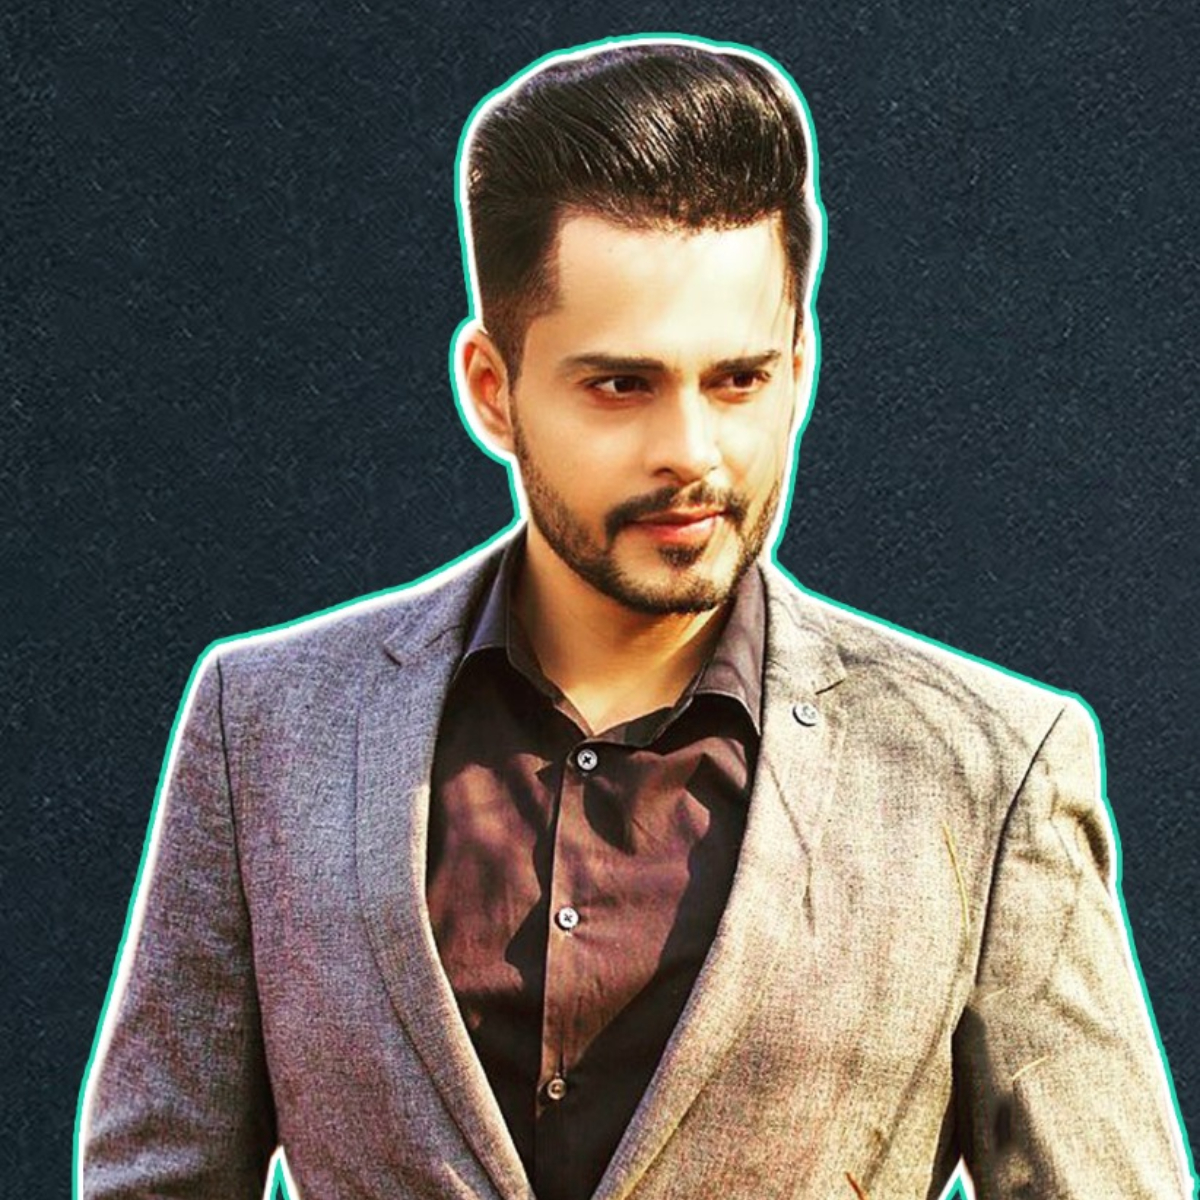 Bigg Boss 14 EXCLUSIVE: Shardul Pandit on struggles, financial issues: Went into a phase where I locked myself